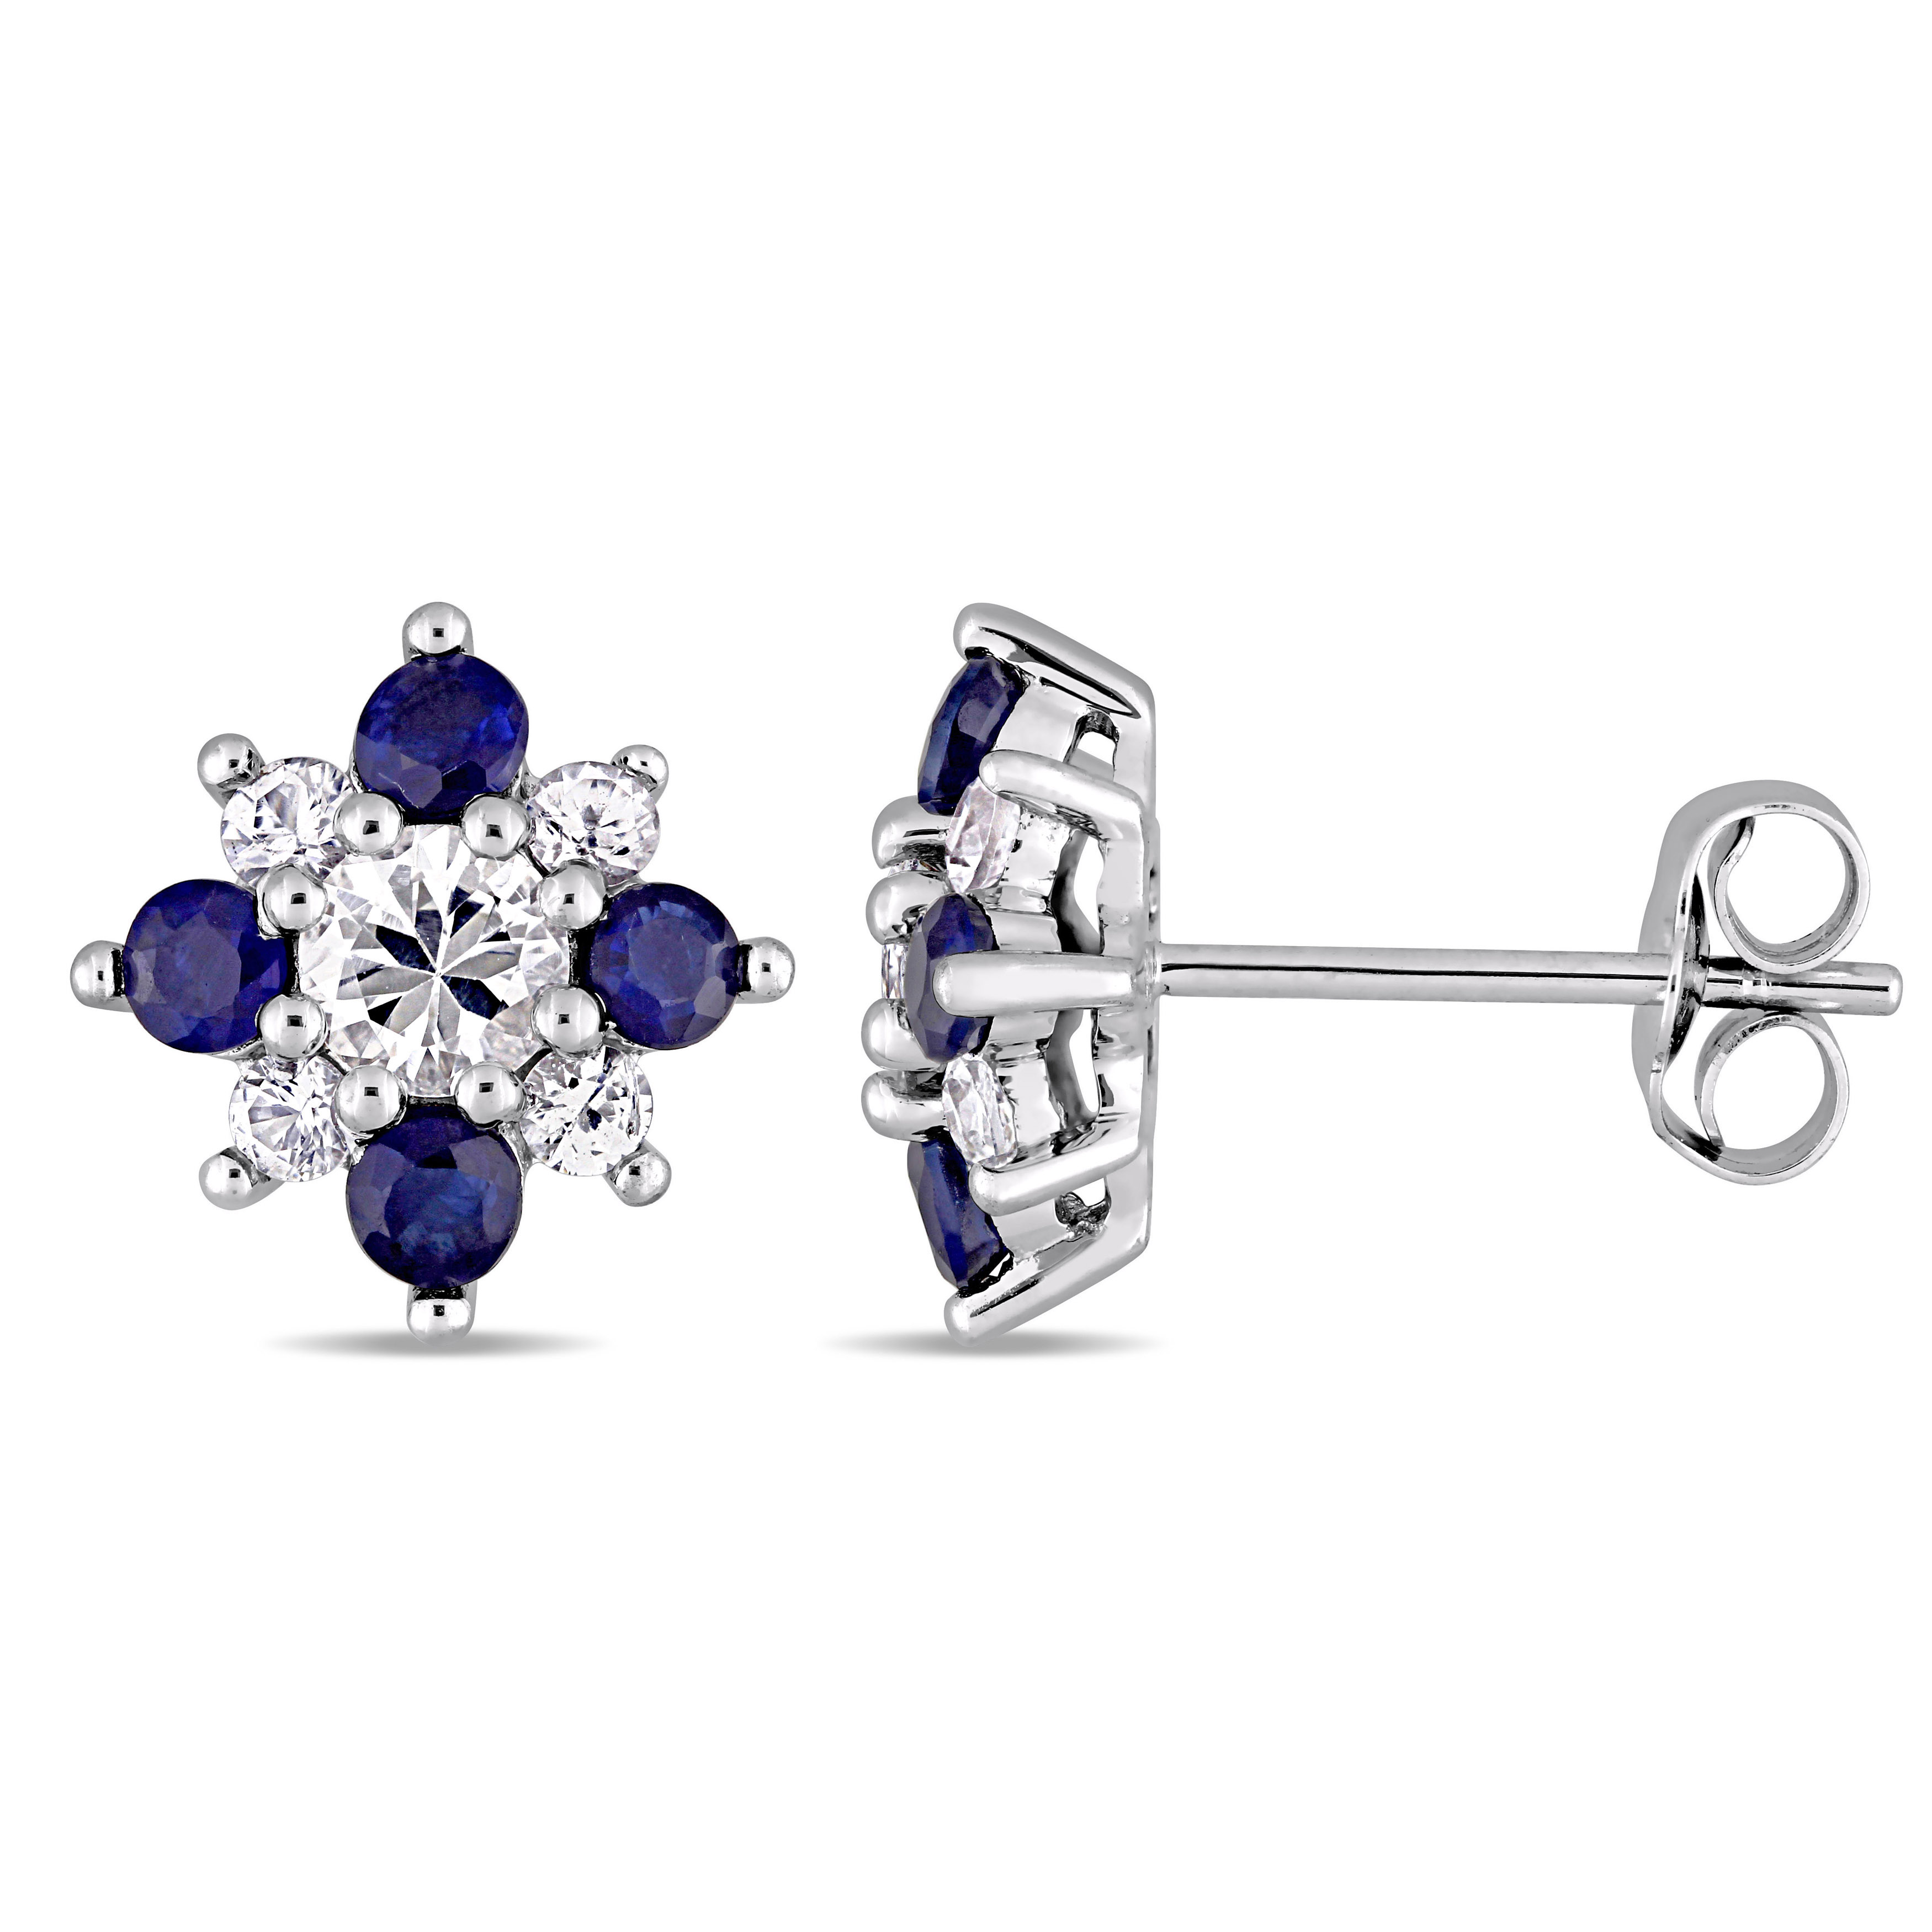 1 3/5 CT TGW Blue and White Sapphire Floral Stud Earrings in 14k White Gold